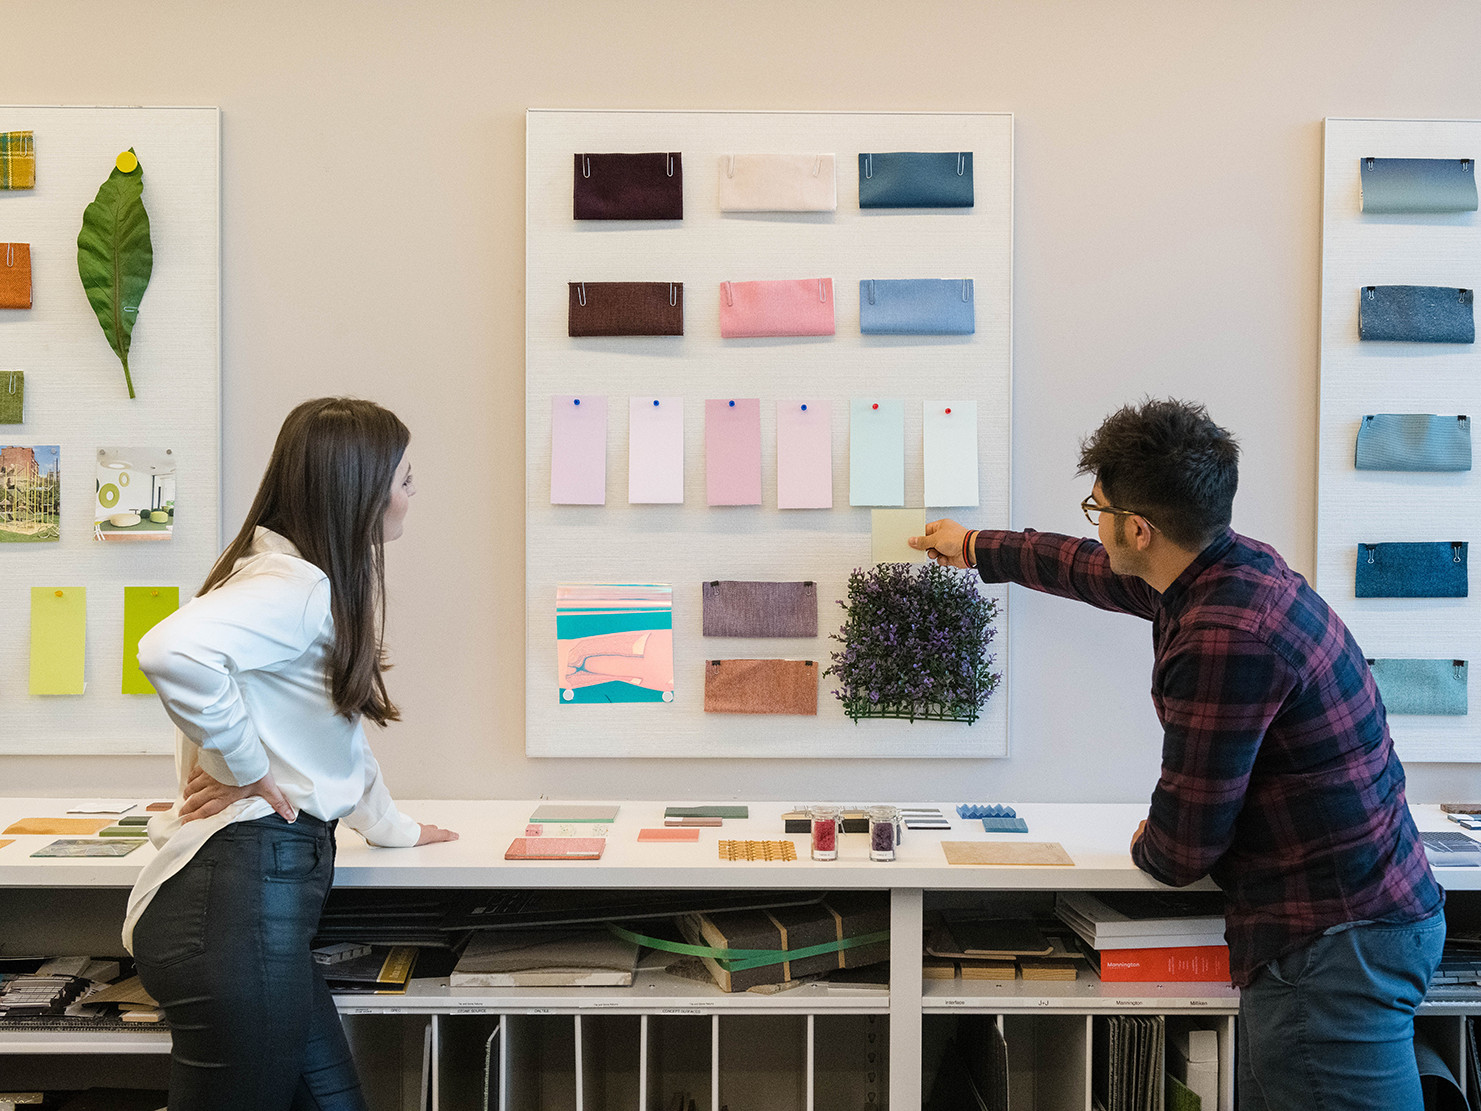 palette boards on walls with various color samples, inspiration images, and flowers and leaves pinned up. two people look on